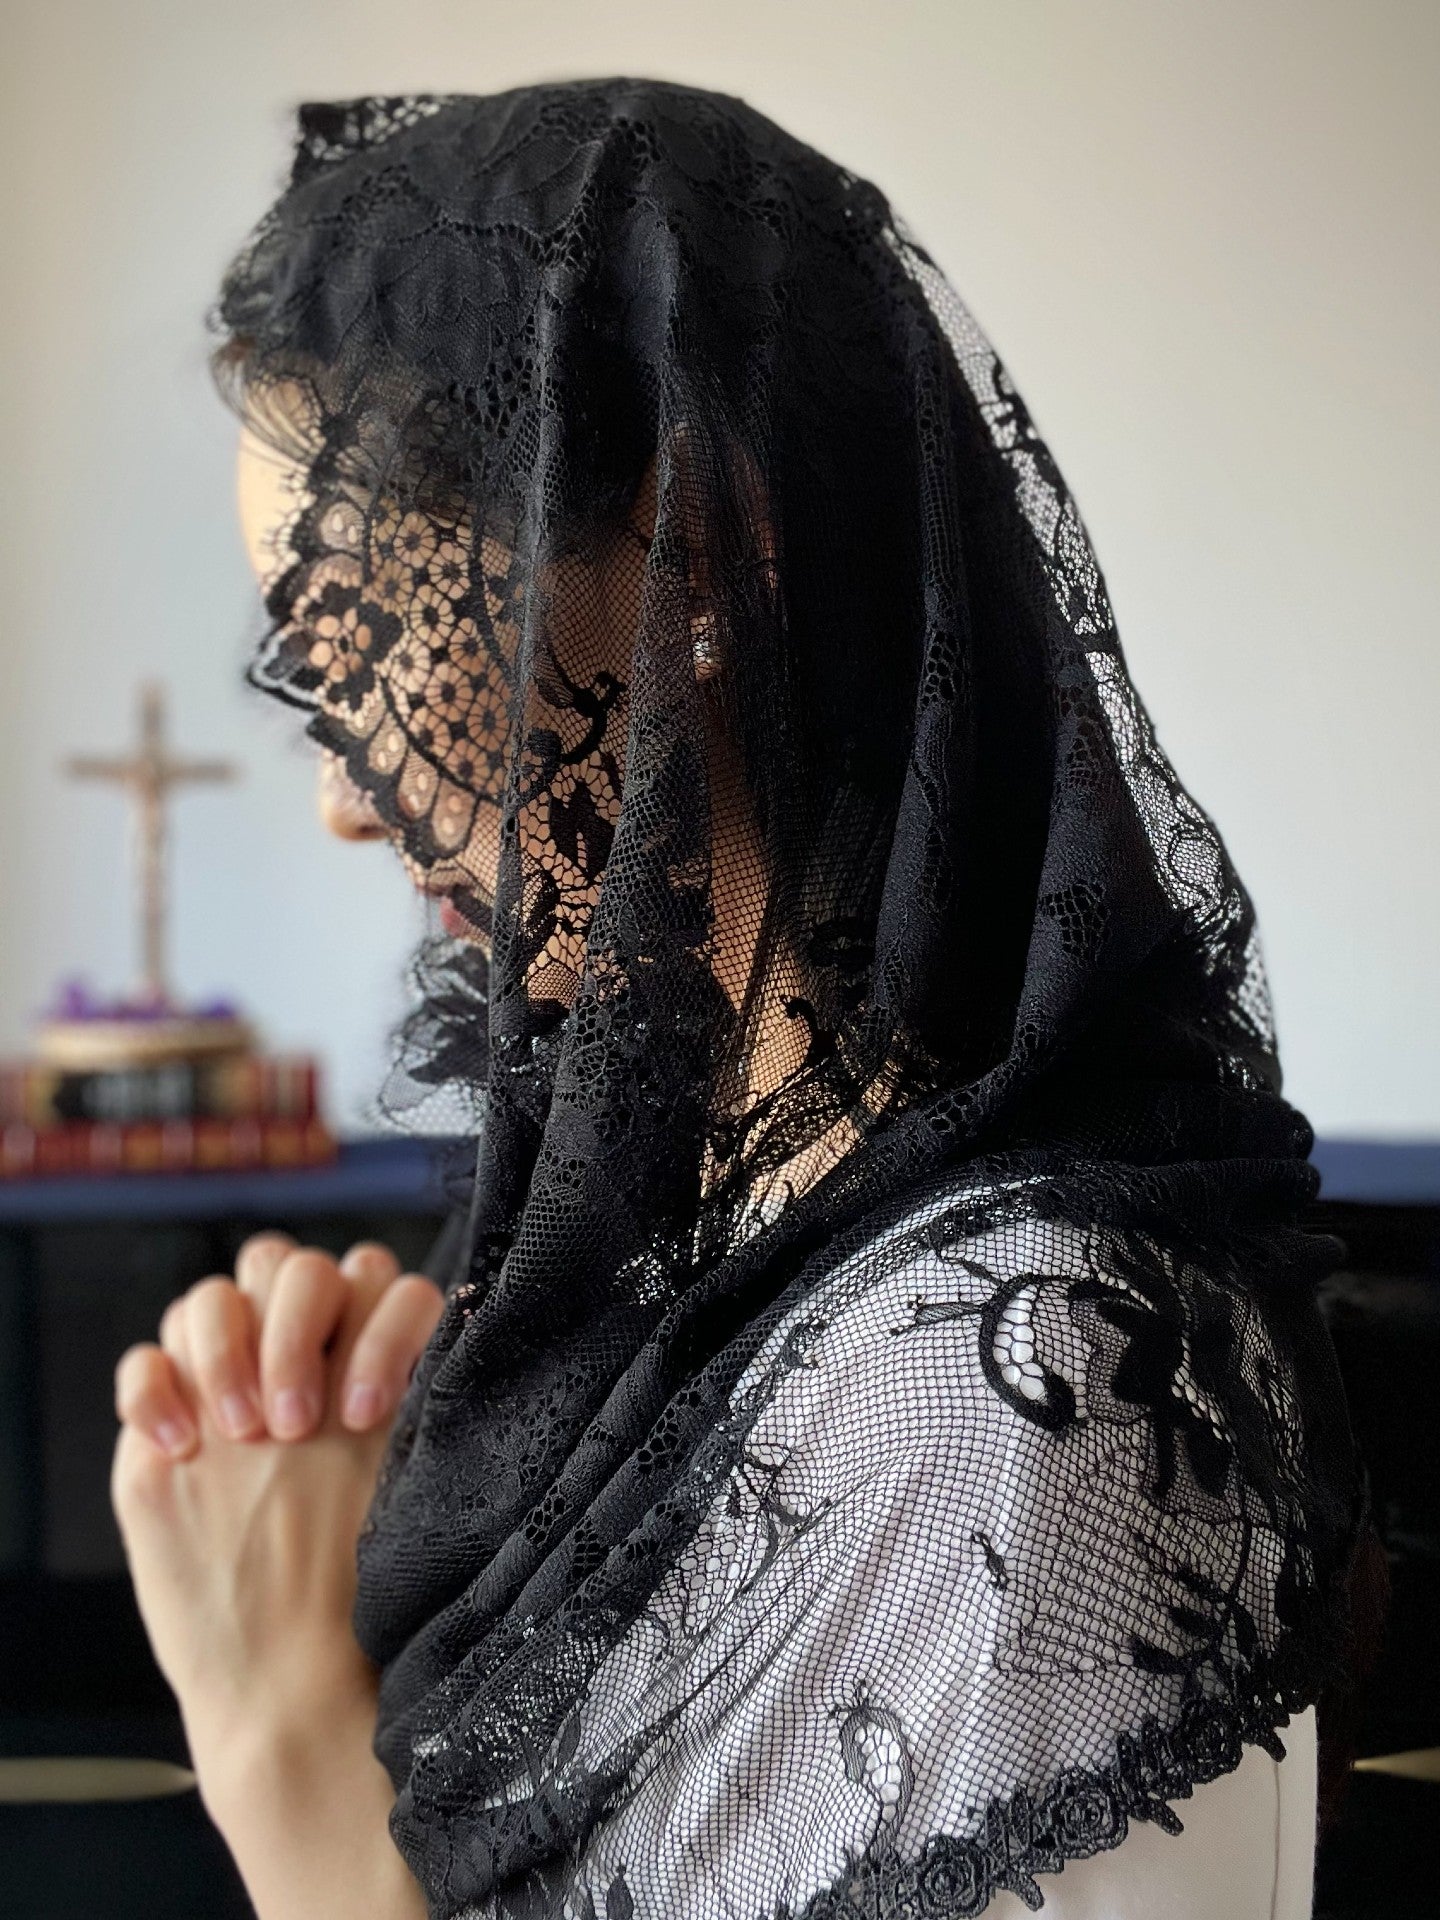 PRE-ORDER Our Lady of the Miraculous Medal Chantilly Lace Infinity Chapel Veil (Black)